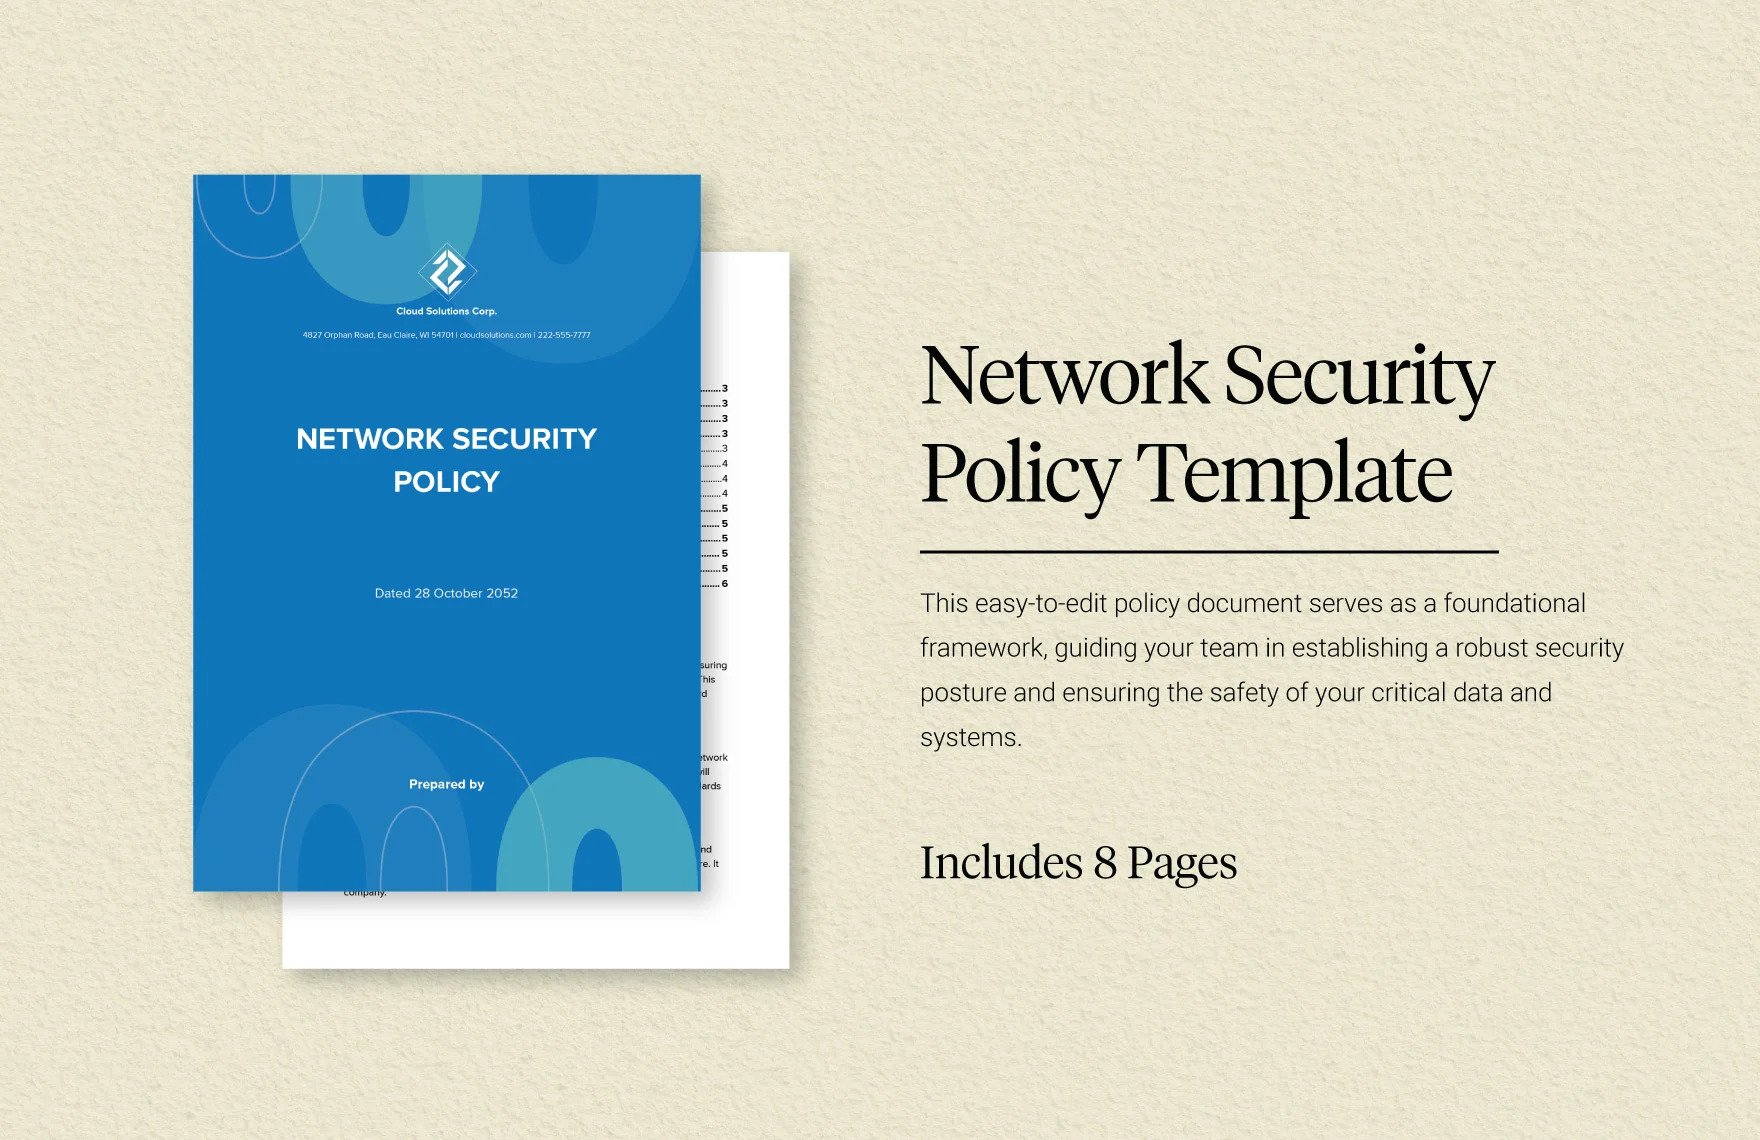 Security Policy Template 13 Free Word, PDF Document Downloads